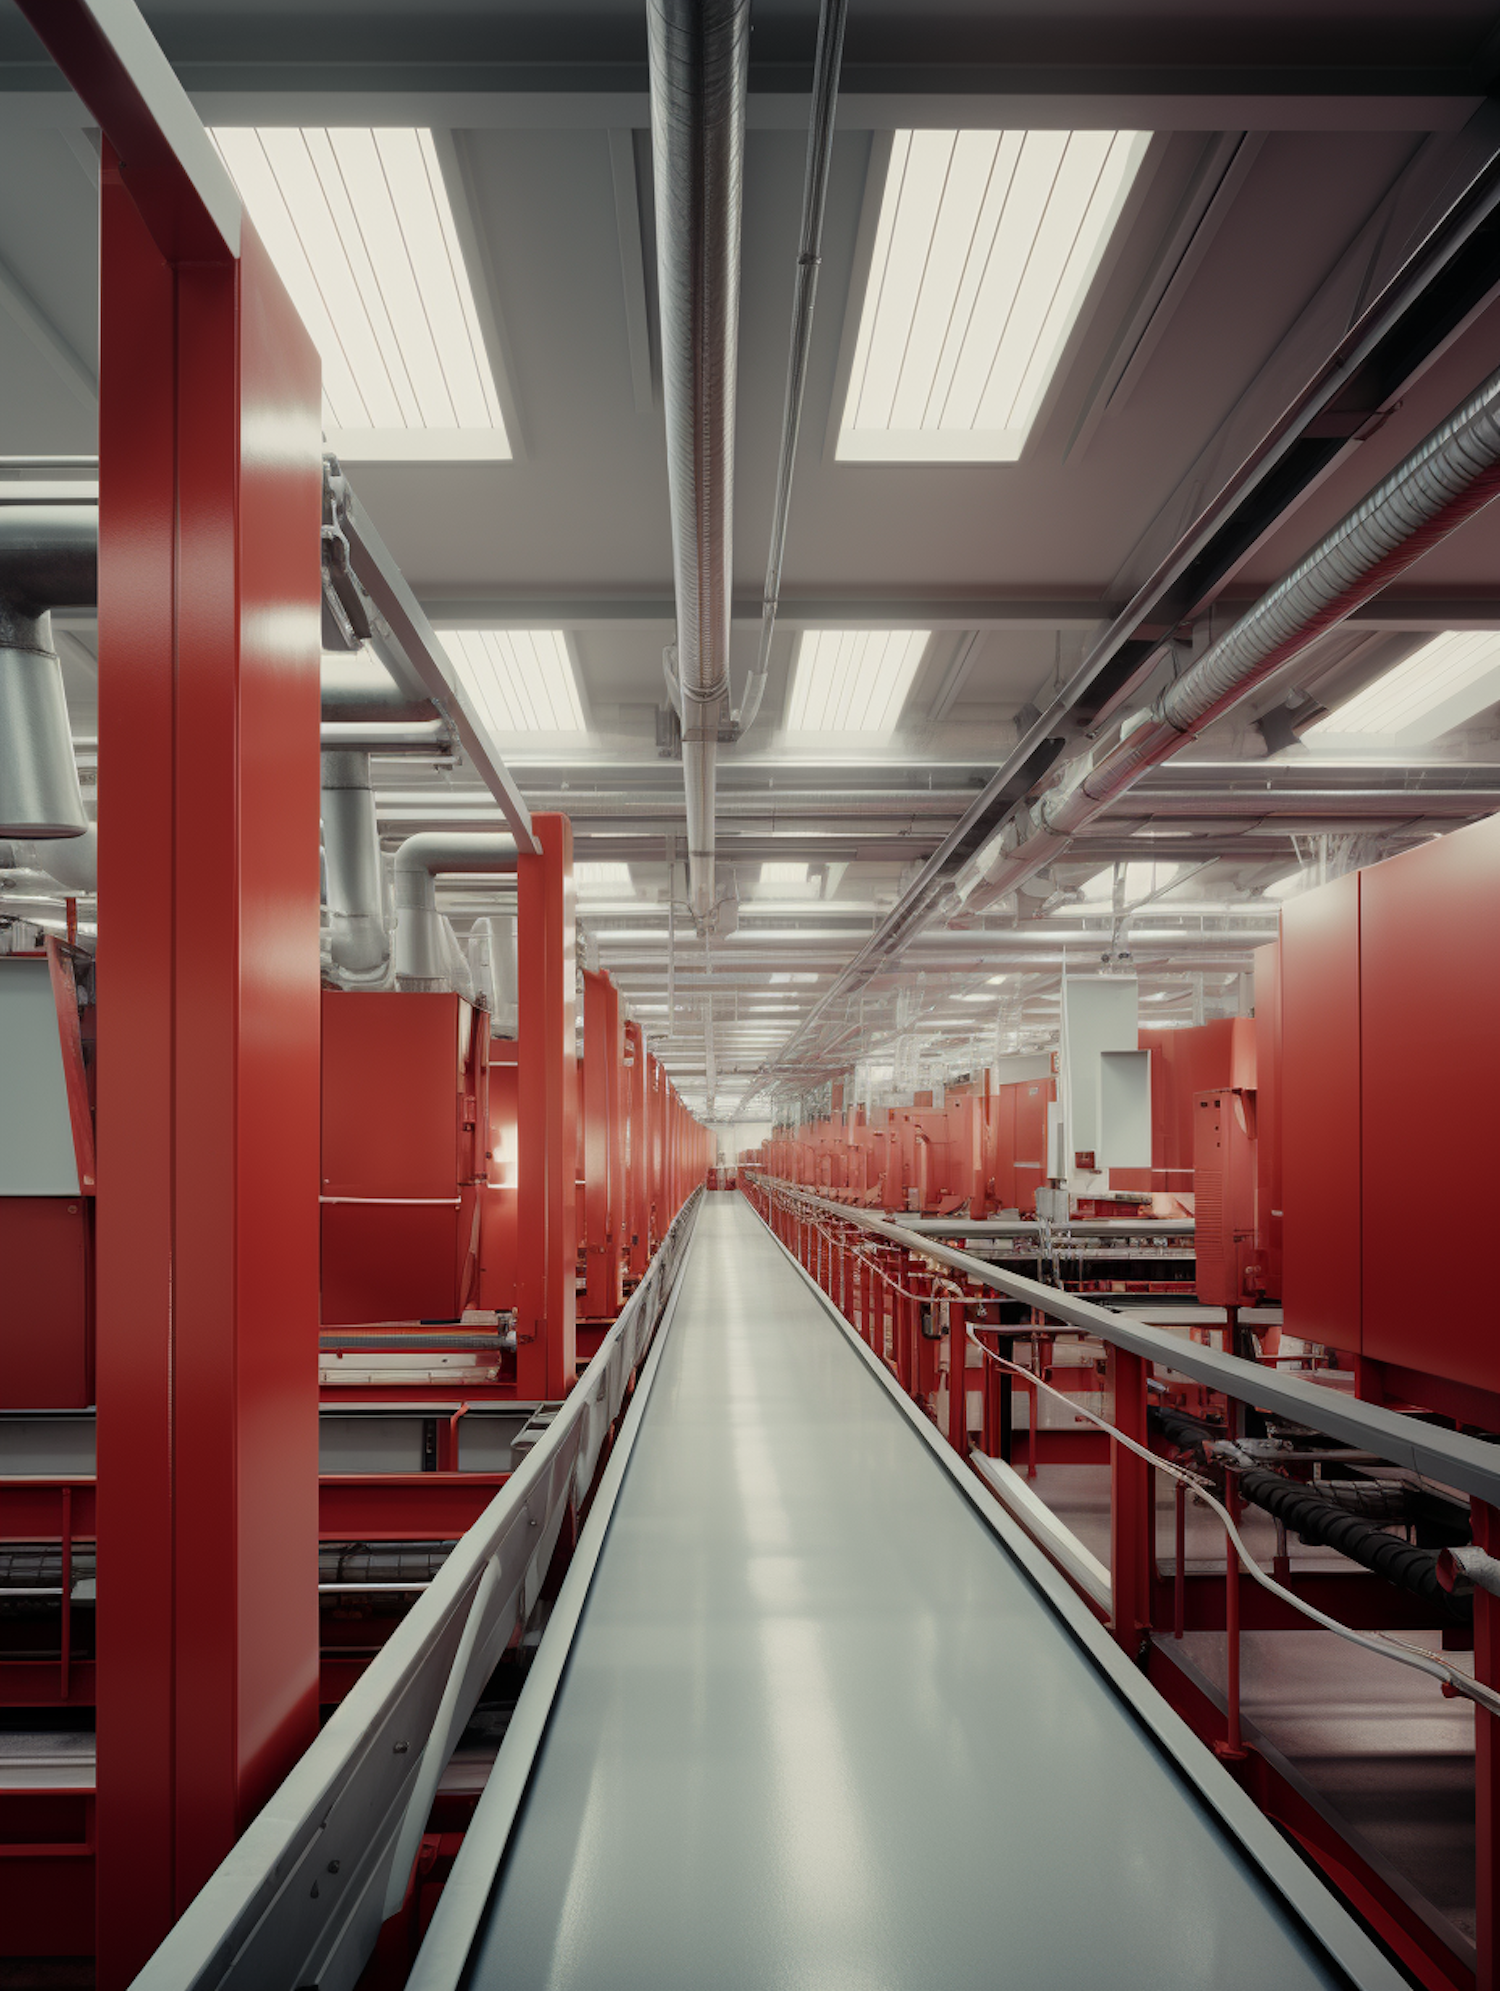 Modern Industrial Facility Interior with Vibrant Red Machinery